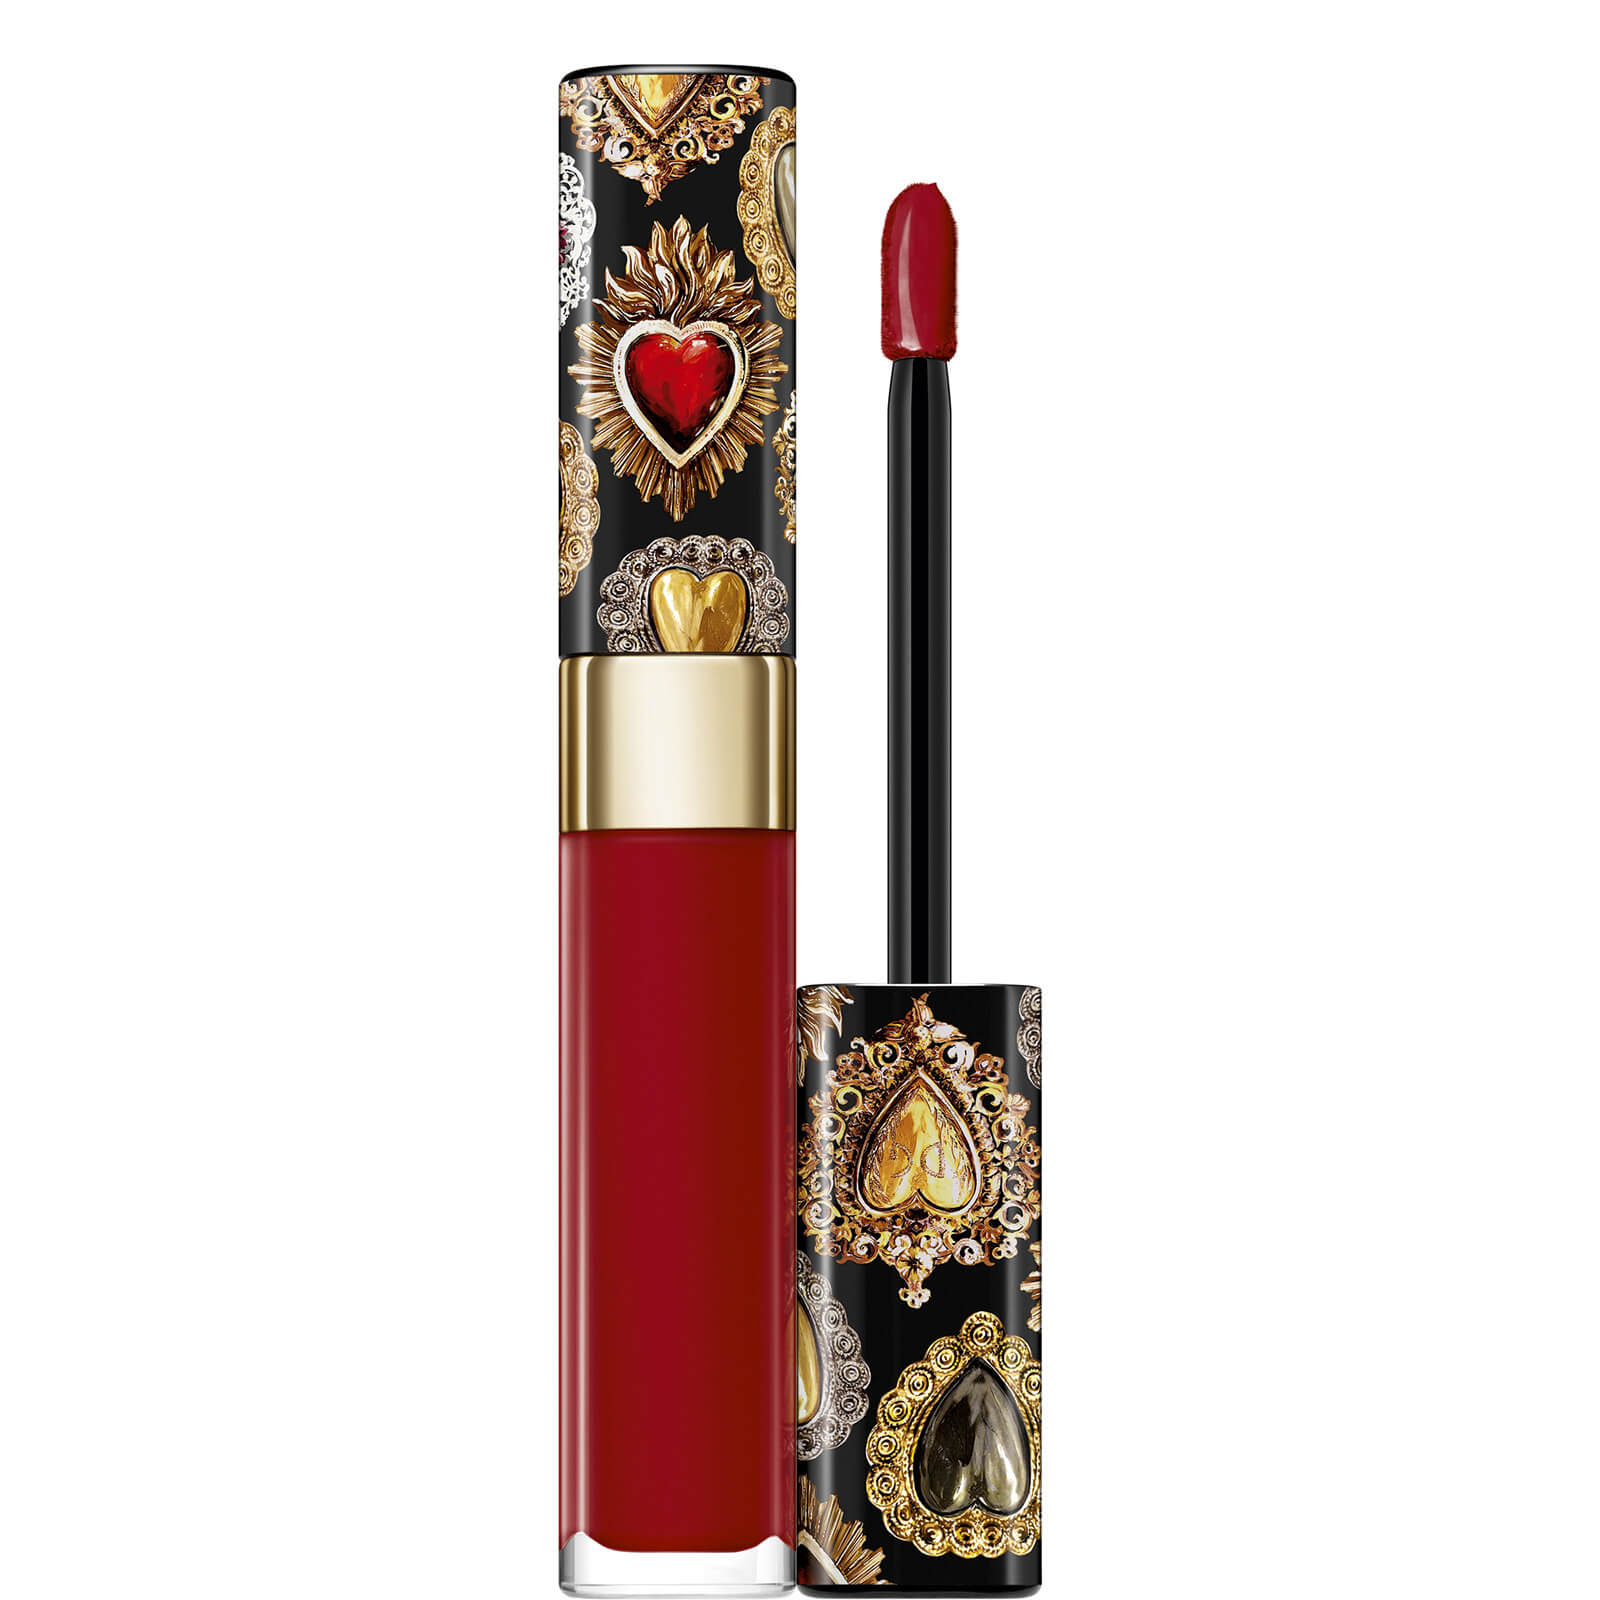 Image of Dolce&Gabbana Shinissimo Lipstick 5ml (Various Shades) - 630 #DGLOVER